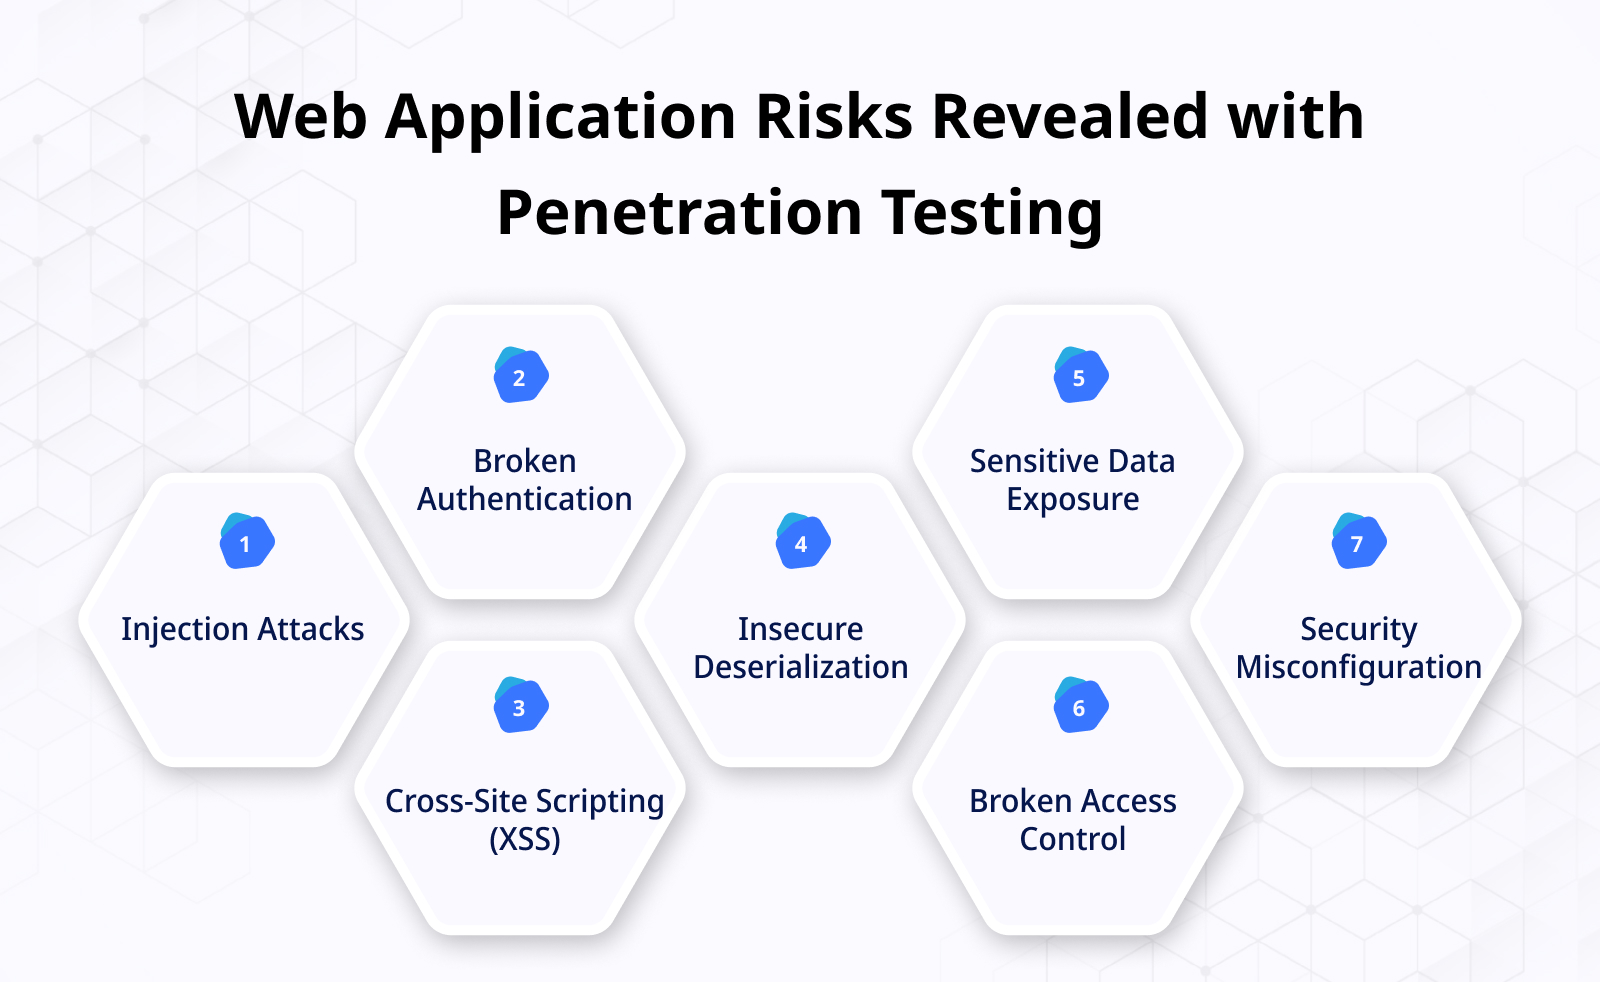 Web Application Risks Revealed with Penetration Testing